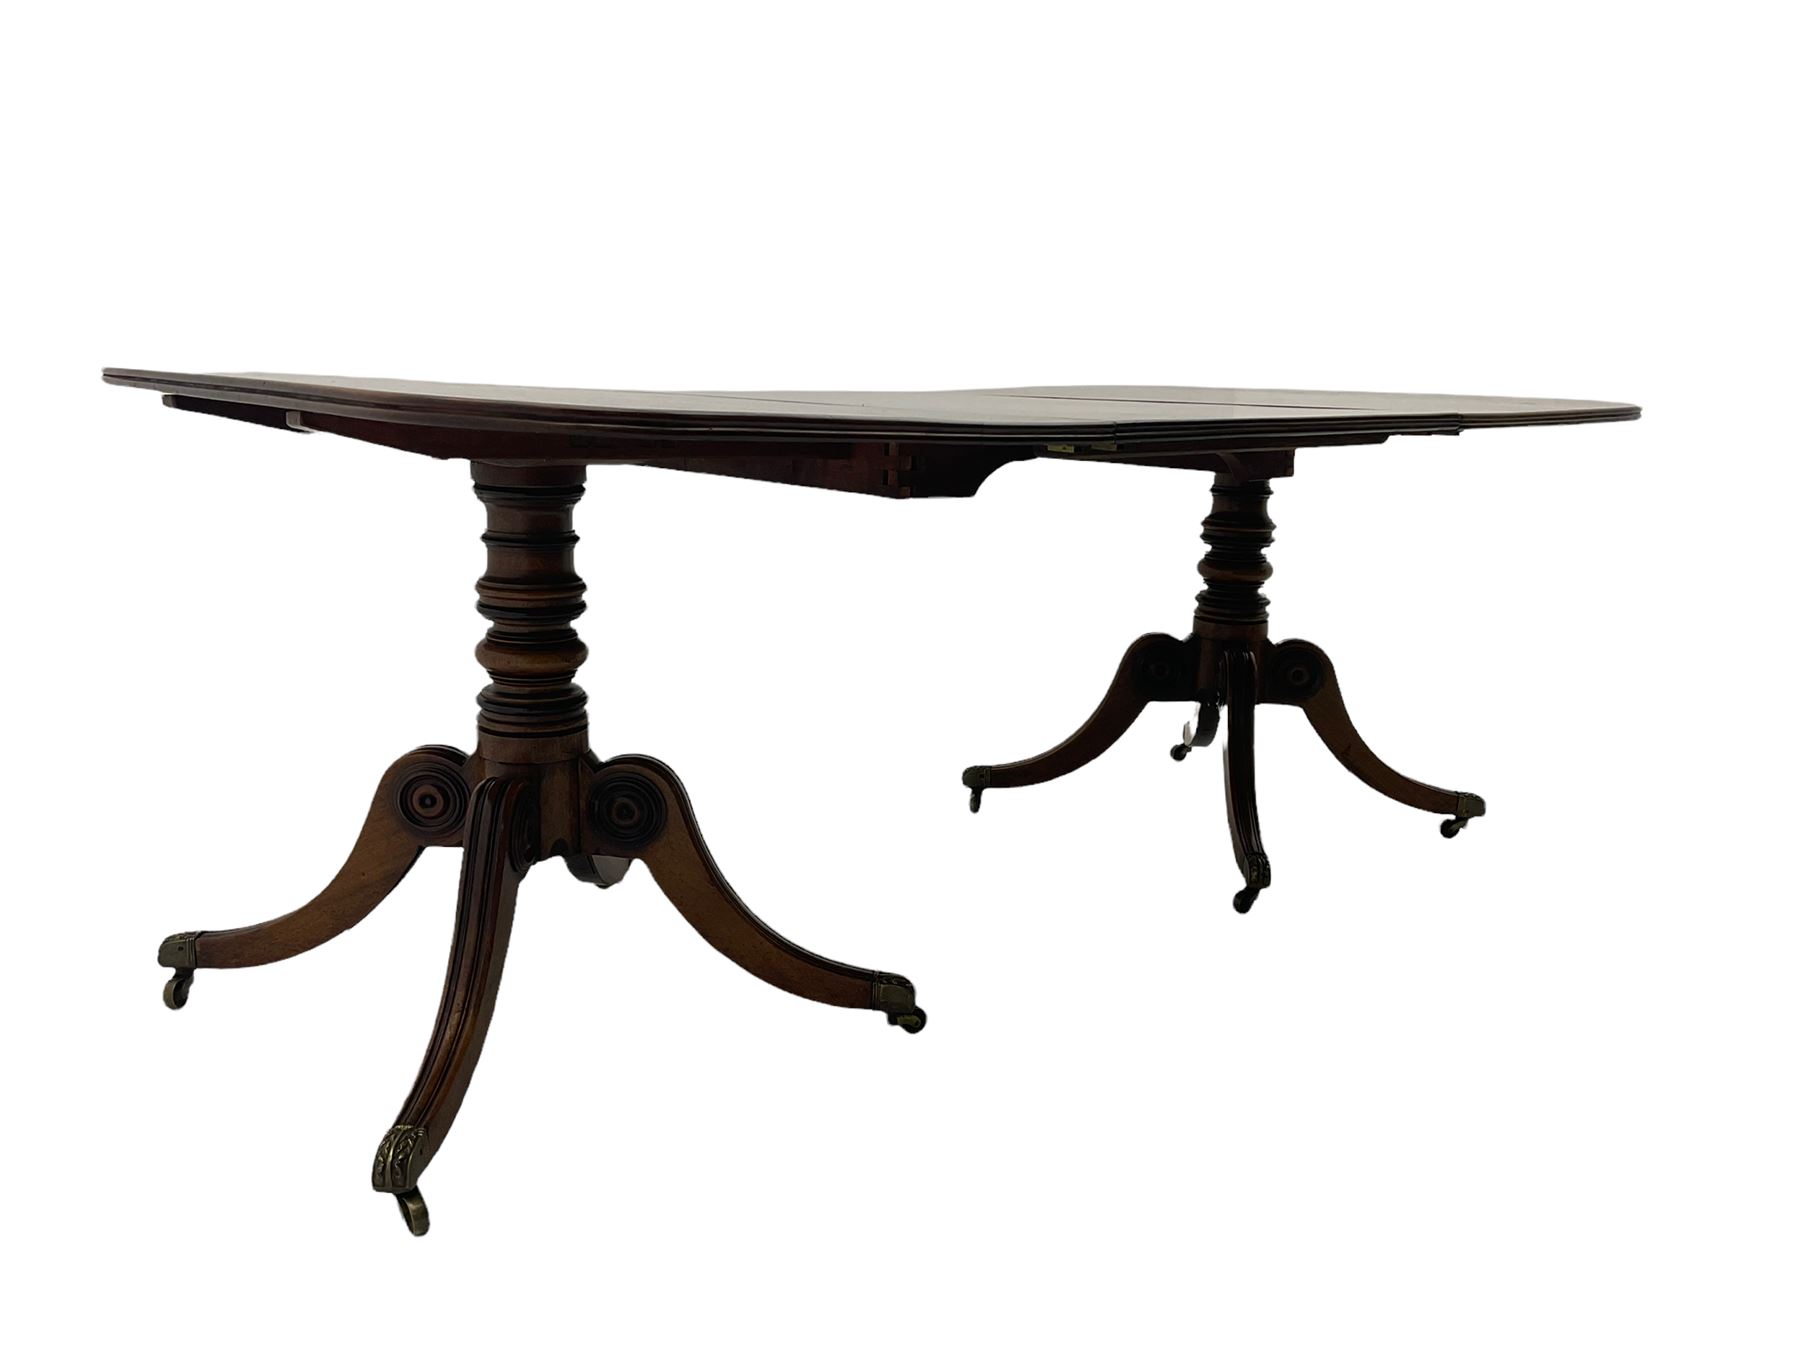 Early 19th century mahogany extending dining table - Image 4 of 9